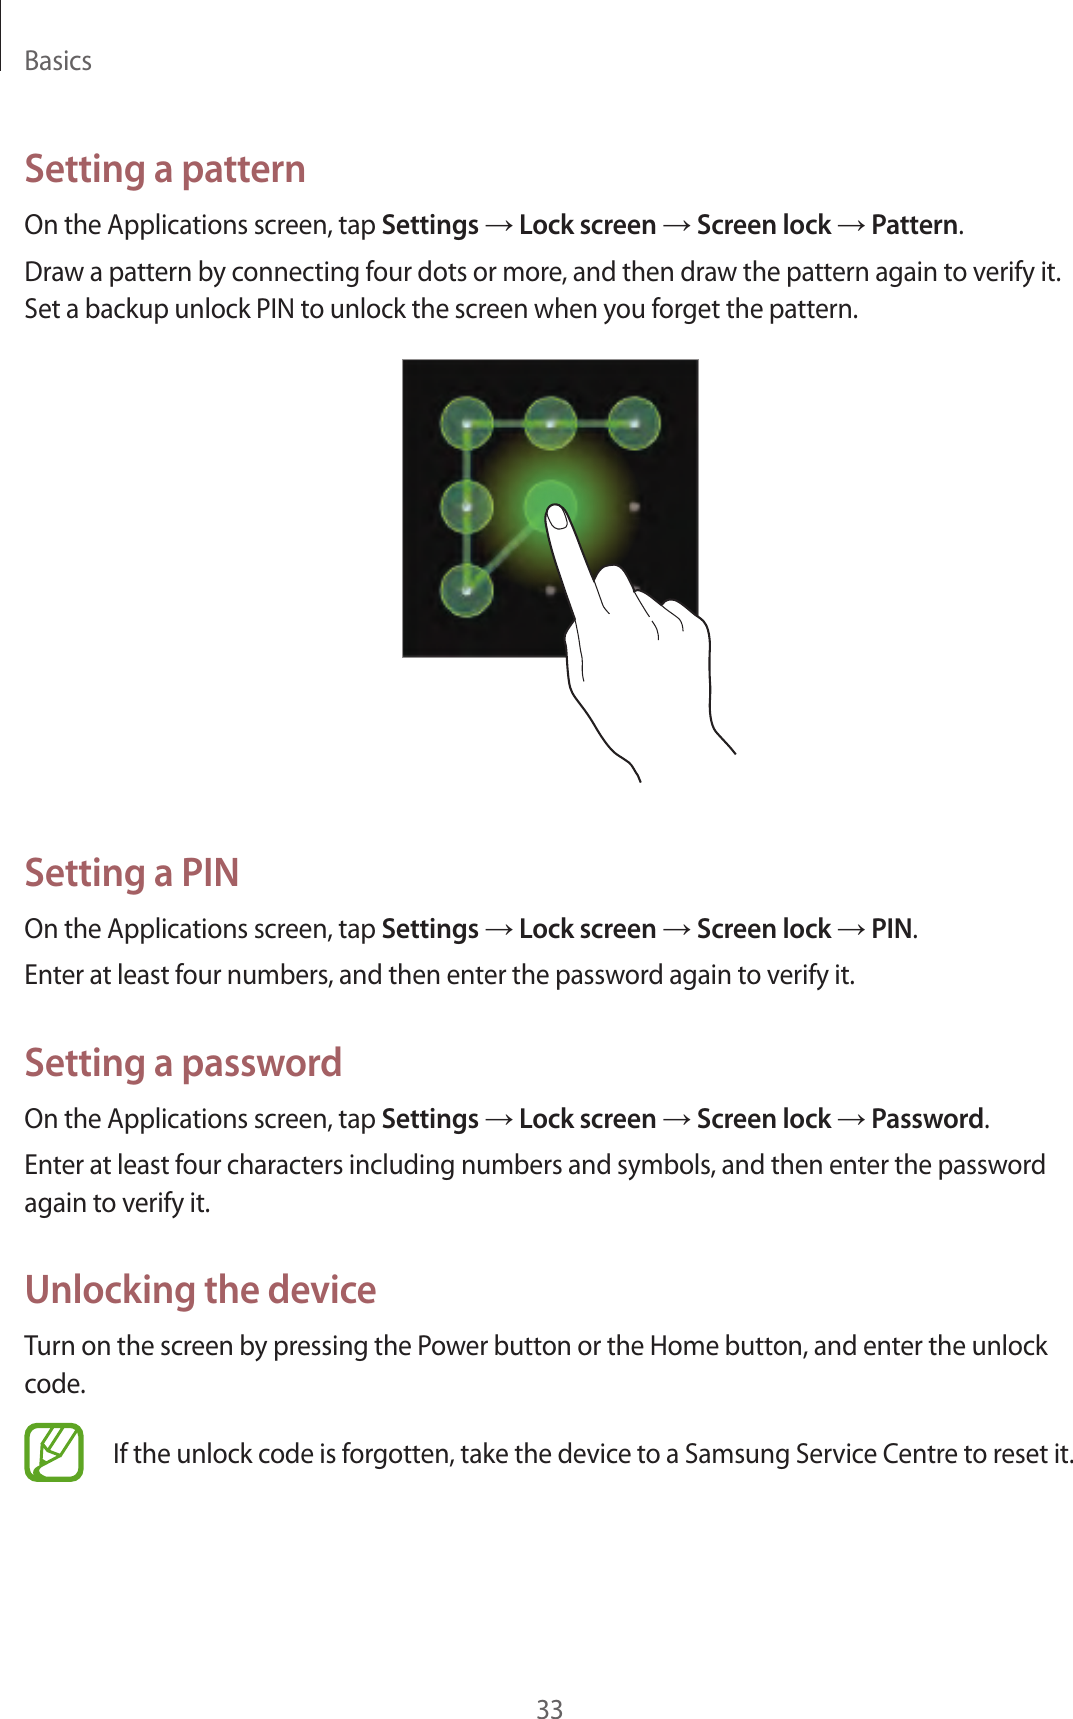 Basics33Setting a patternOn the Applications screen, tap Settings → Lock screen → Screen lock → Pattern.Draw a pattern by connecting four dots or more, and then draw the pattern again to verify it. Set a backup unlock PIN to unlock the screen when you forget the pattern.Setting a PINOn the Applications screen, tap Settings → Lock screen → Screen lock → PIN.Enter at least four numbers, and then enter the password again to verify it.Setting a passwordOn the Applications screen, tap Settings → Lock screen → Screen lock → Password.Enter at least four characters including numbers and symbols, and then enter the password again to verify it.Unlocking the deviceTurn on the screen by pressing the Power button or the Home button, and enter the unlock code.If the unlock code is forgotten, take the device to a Samsung Service Centre to reset it.